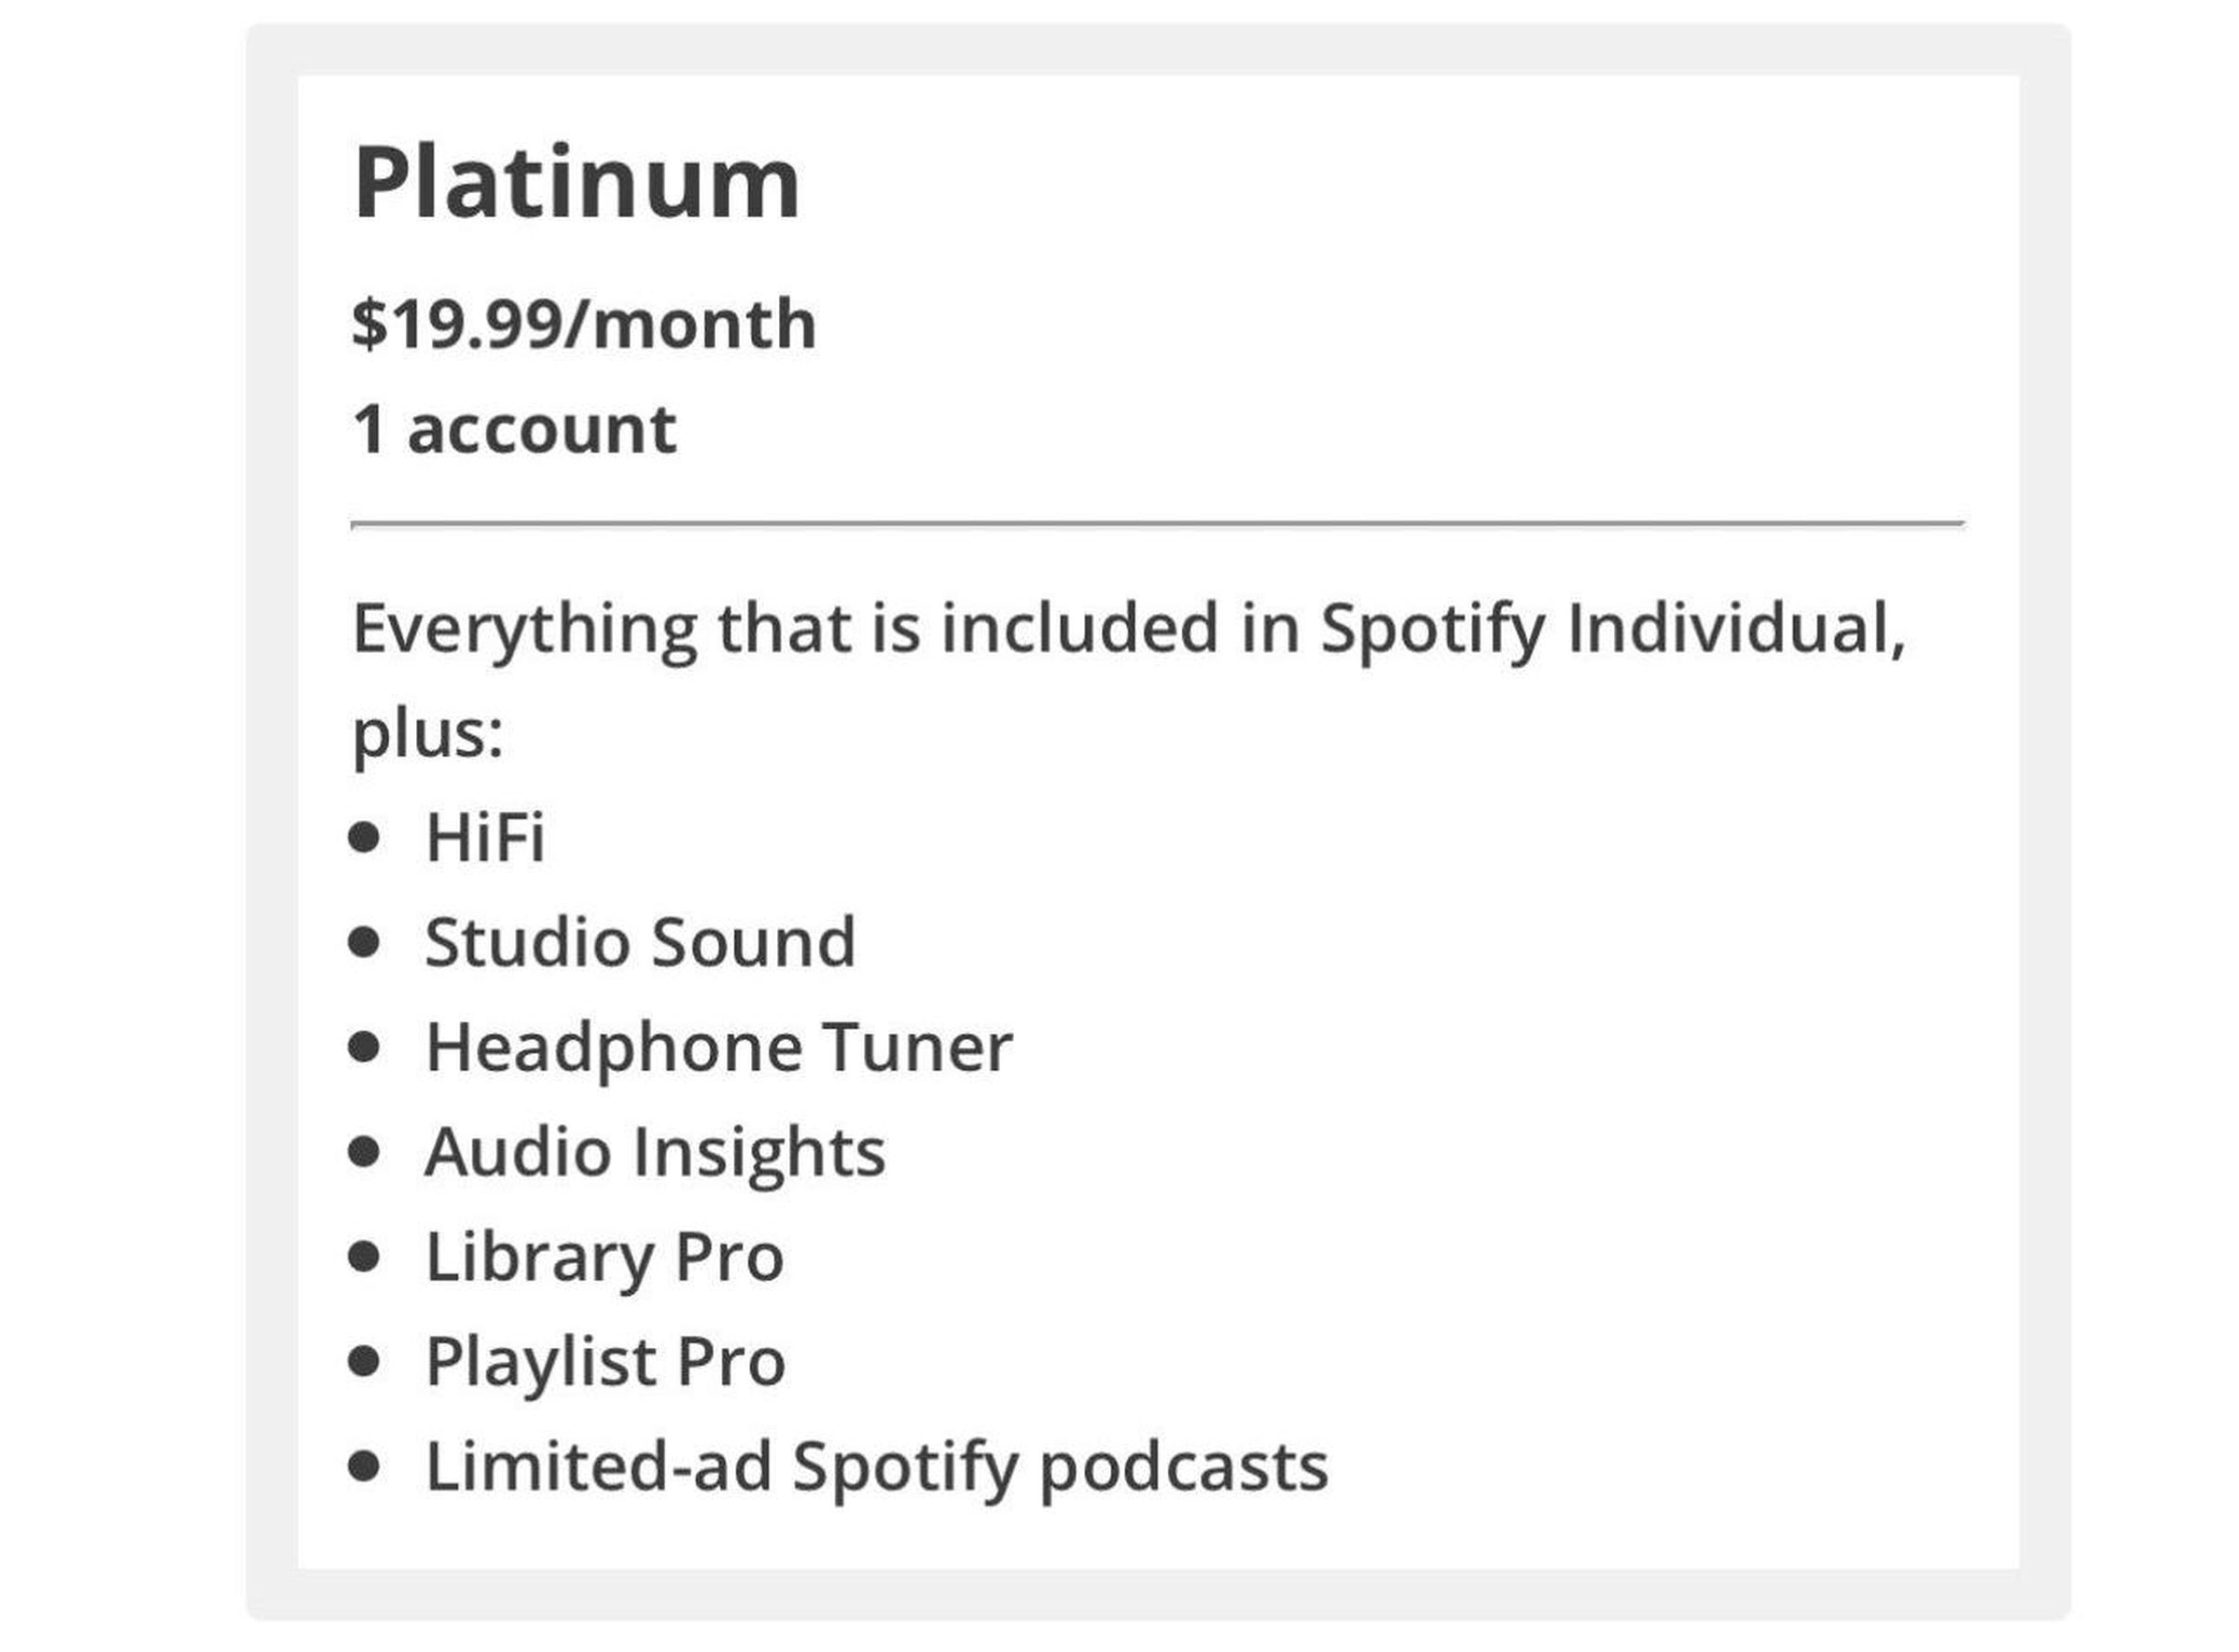 A screenshot of Spotify’s survey about the new Platinum plan.